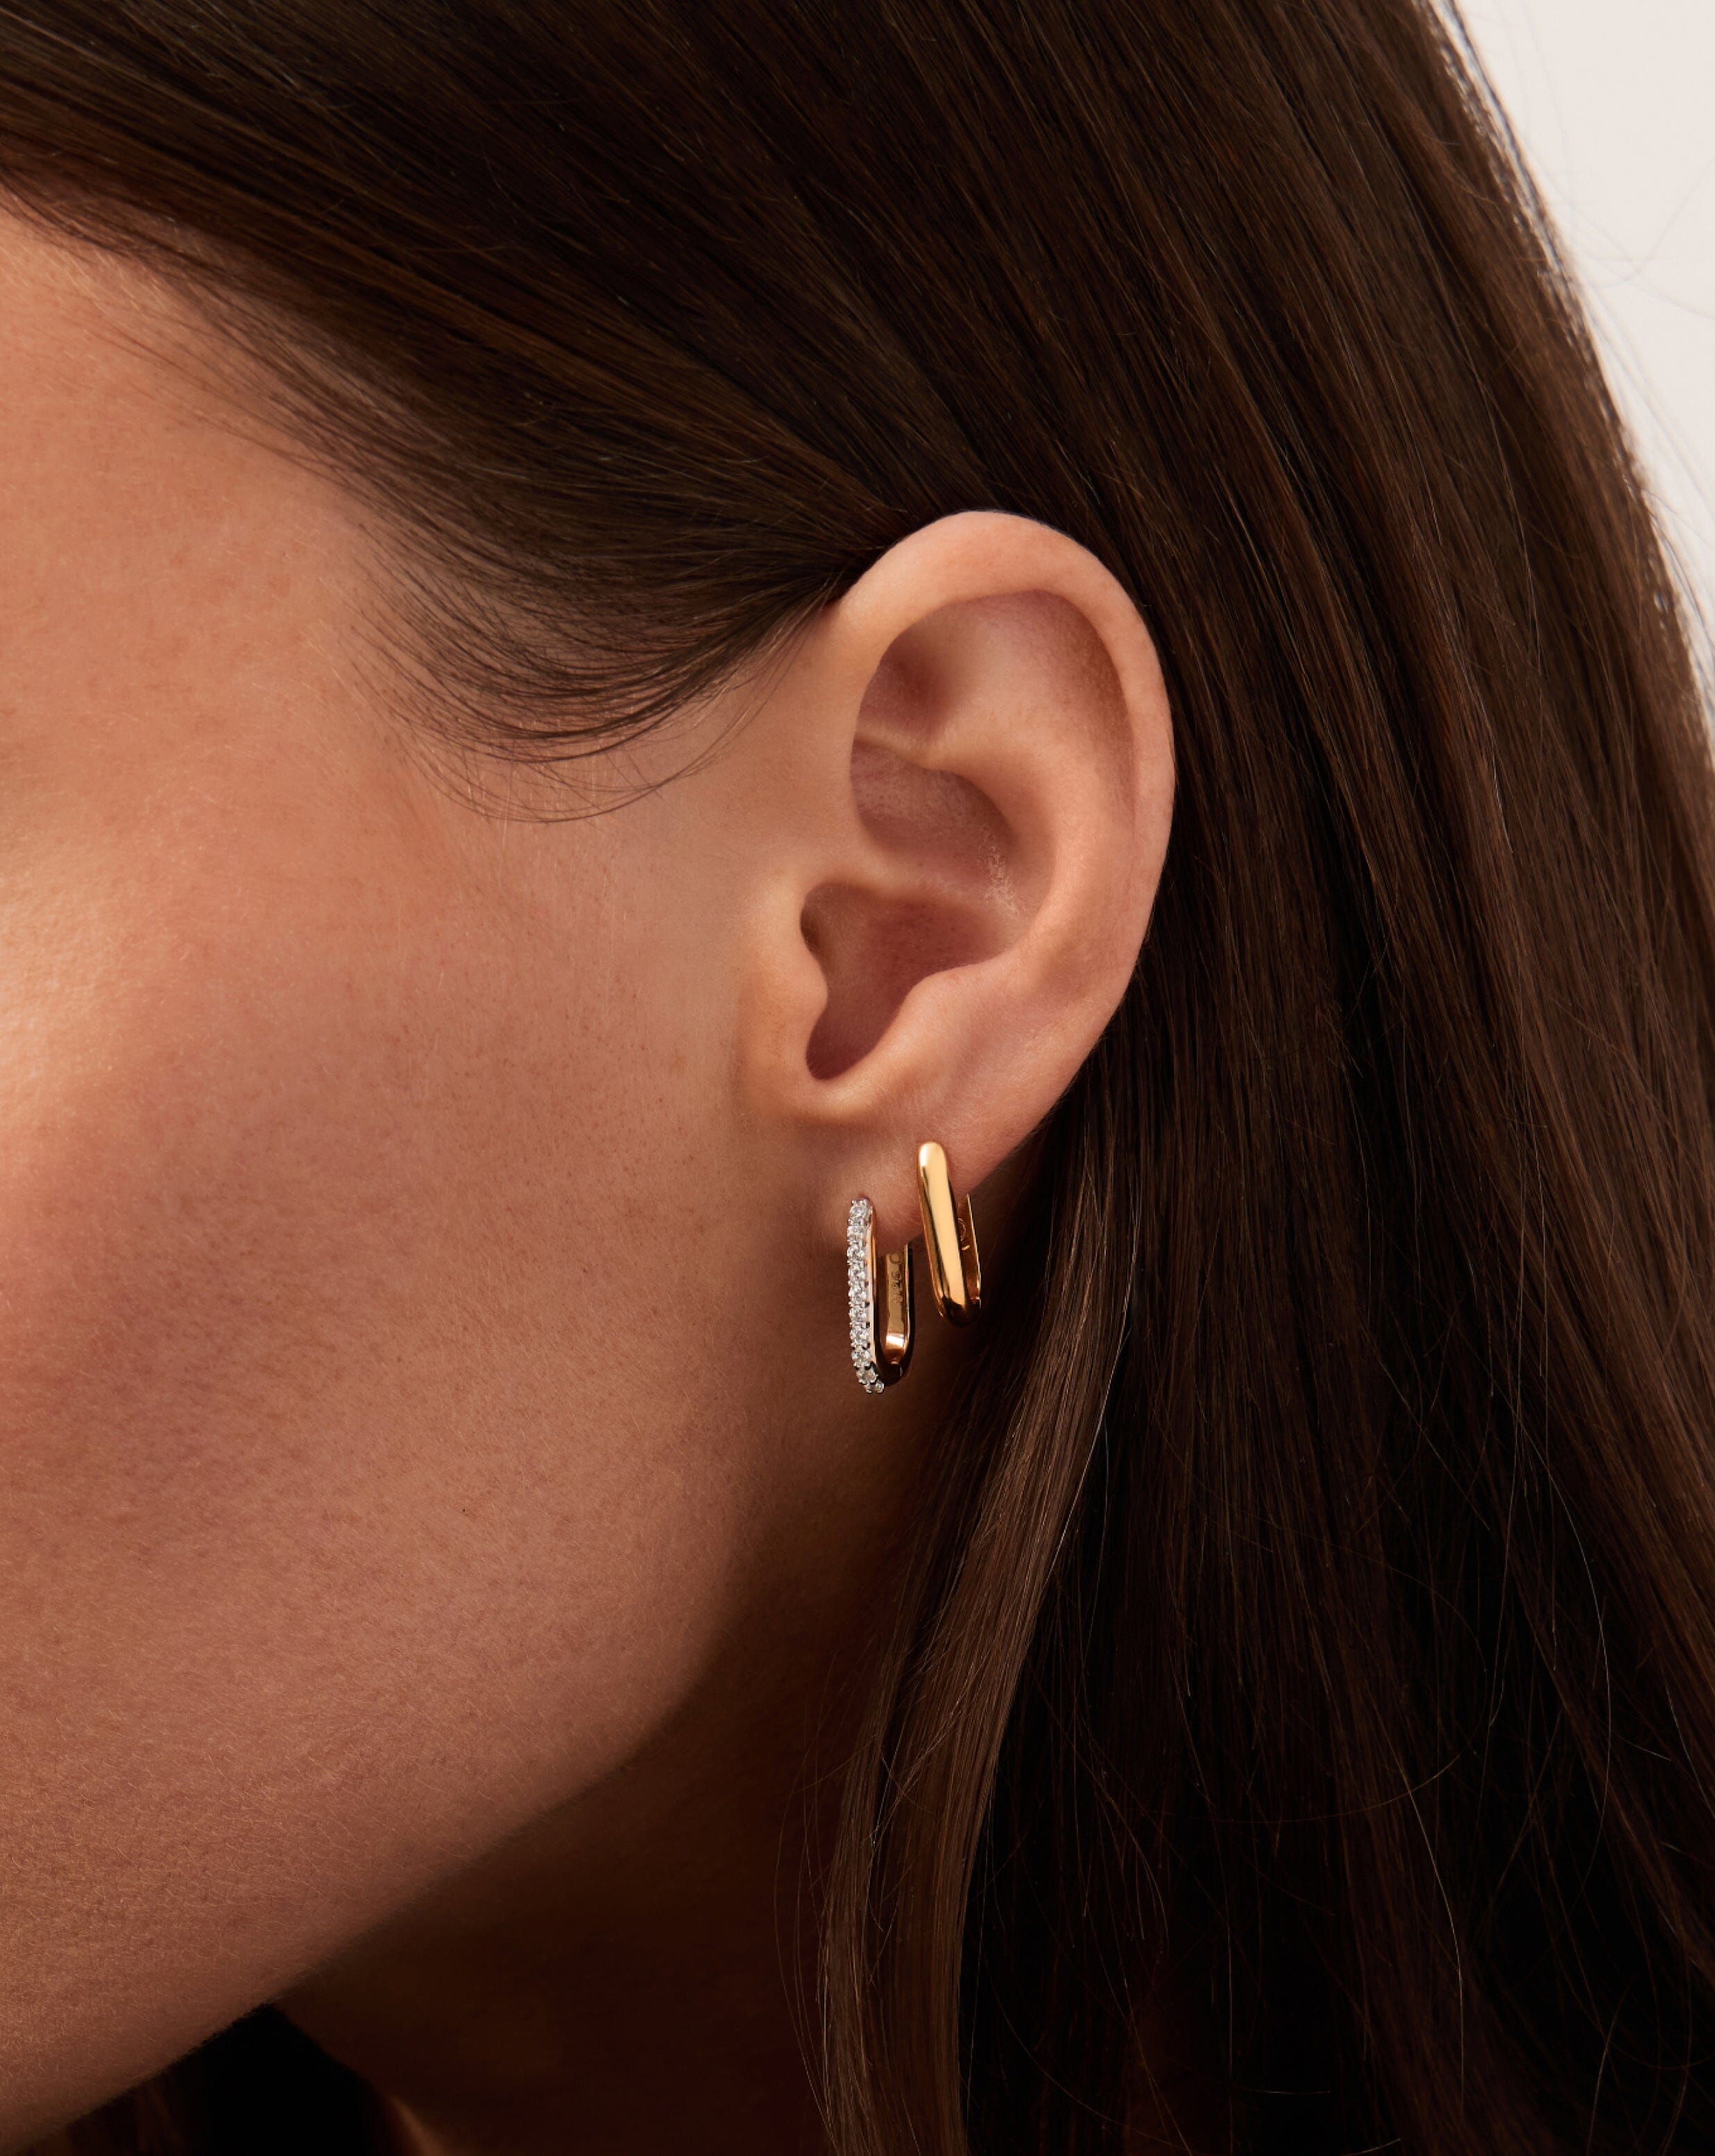 Classic Ovate Hoop Earrings | 18ct Recycled Gold Vermeil on Recycled Sterling Silver Earrings Missoma 